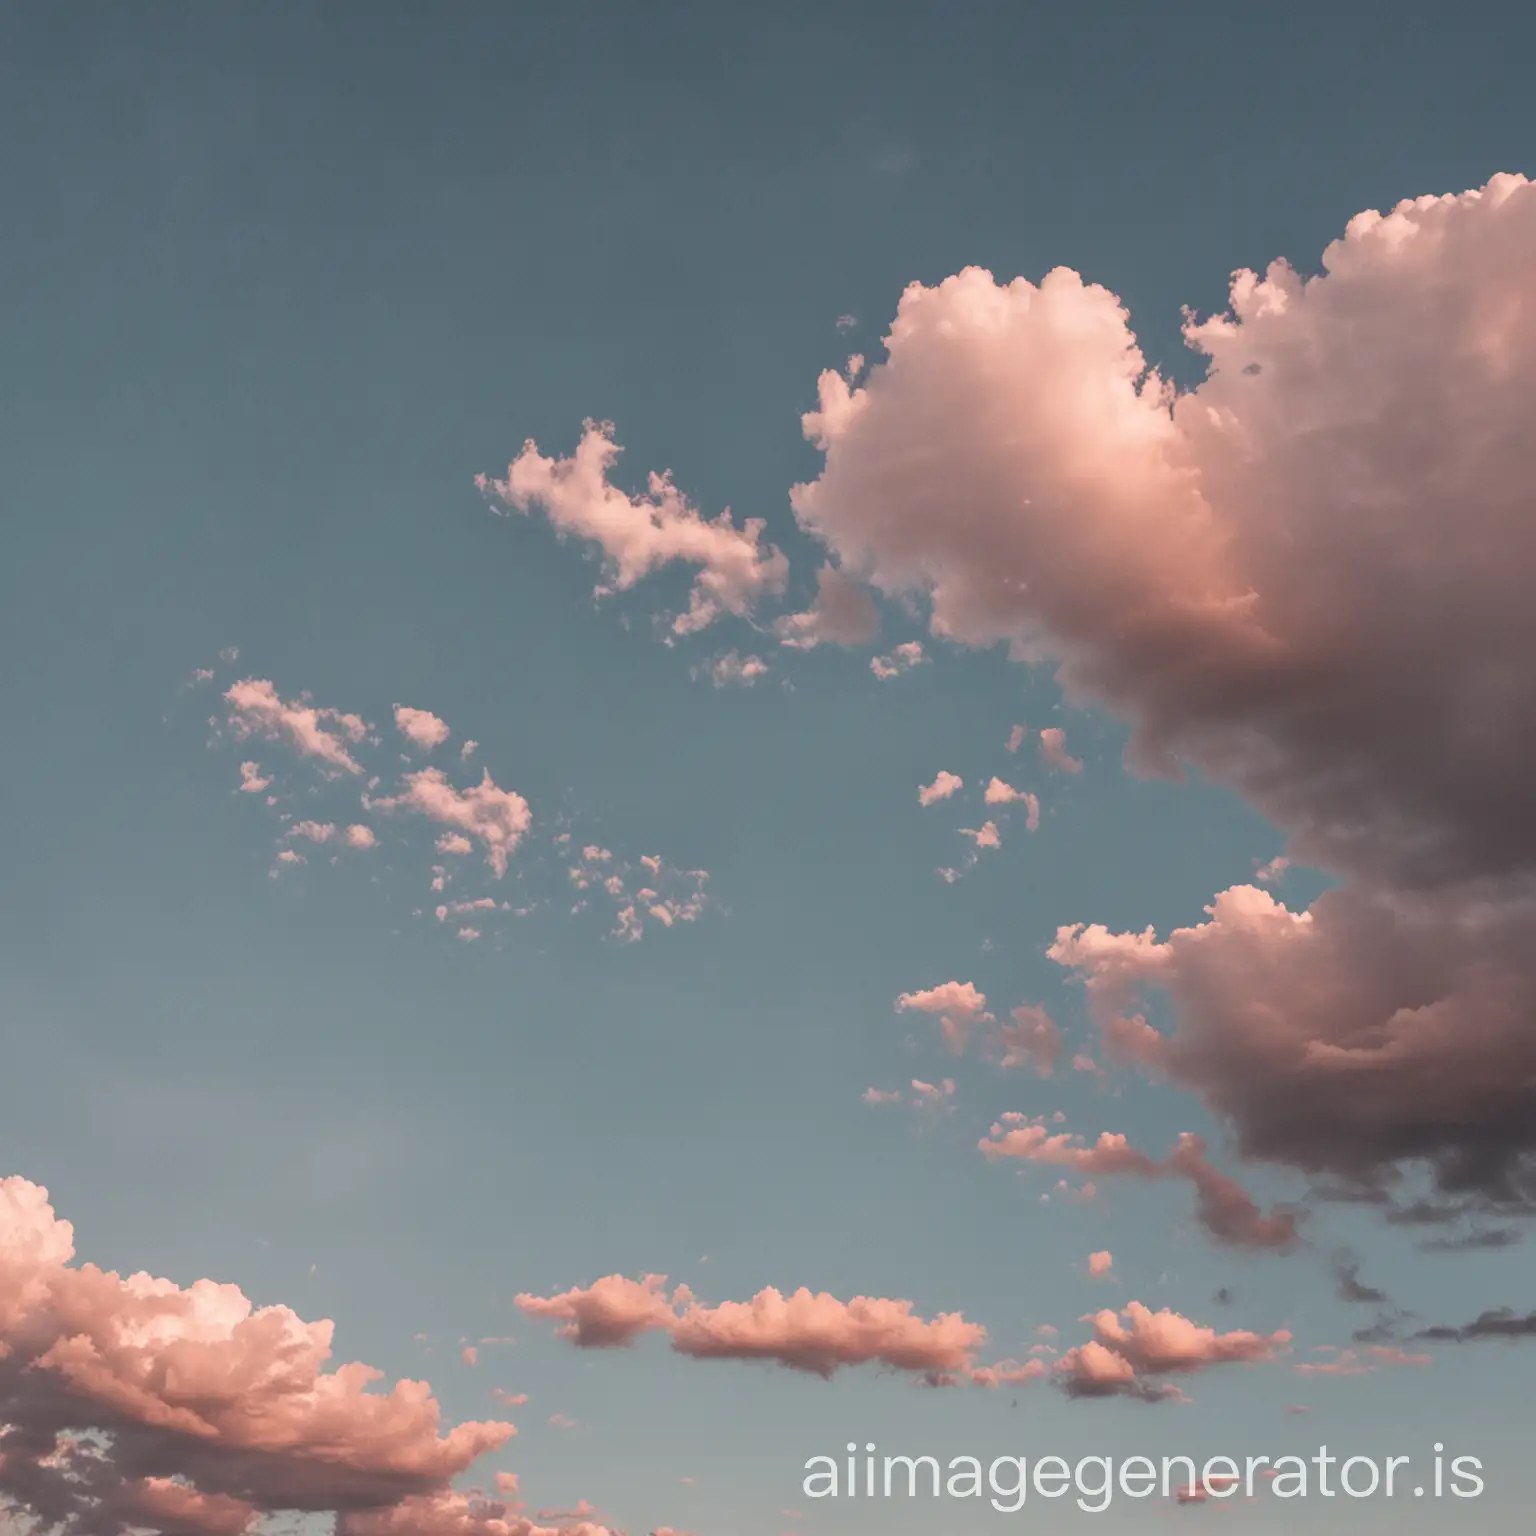 cloudy sky with same color palette and cloud patterns